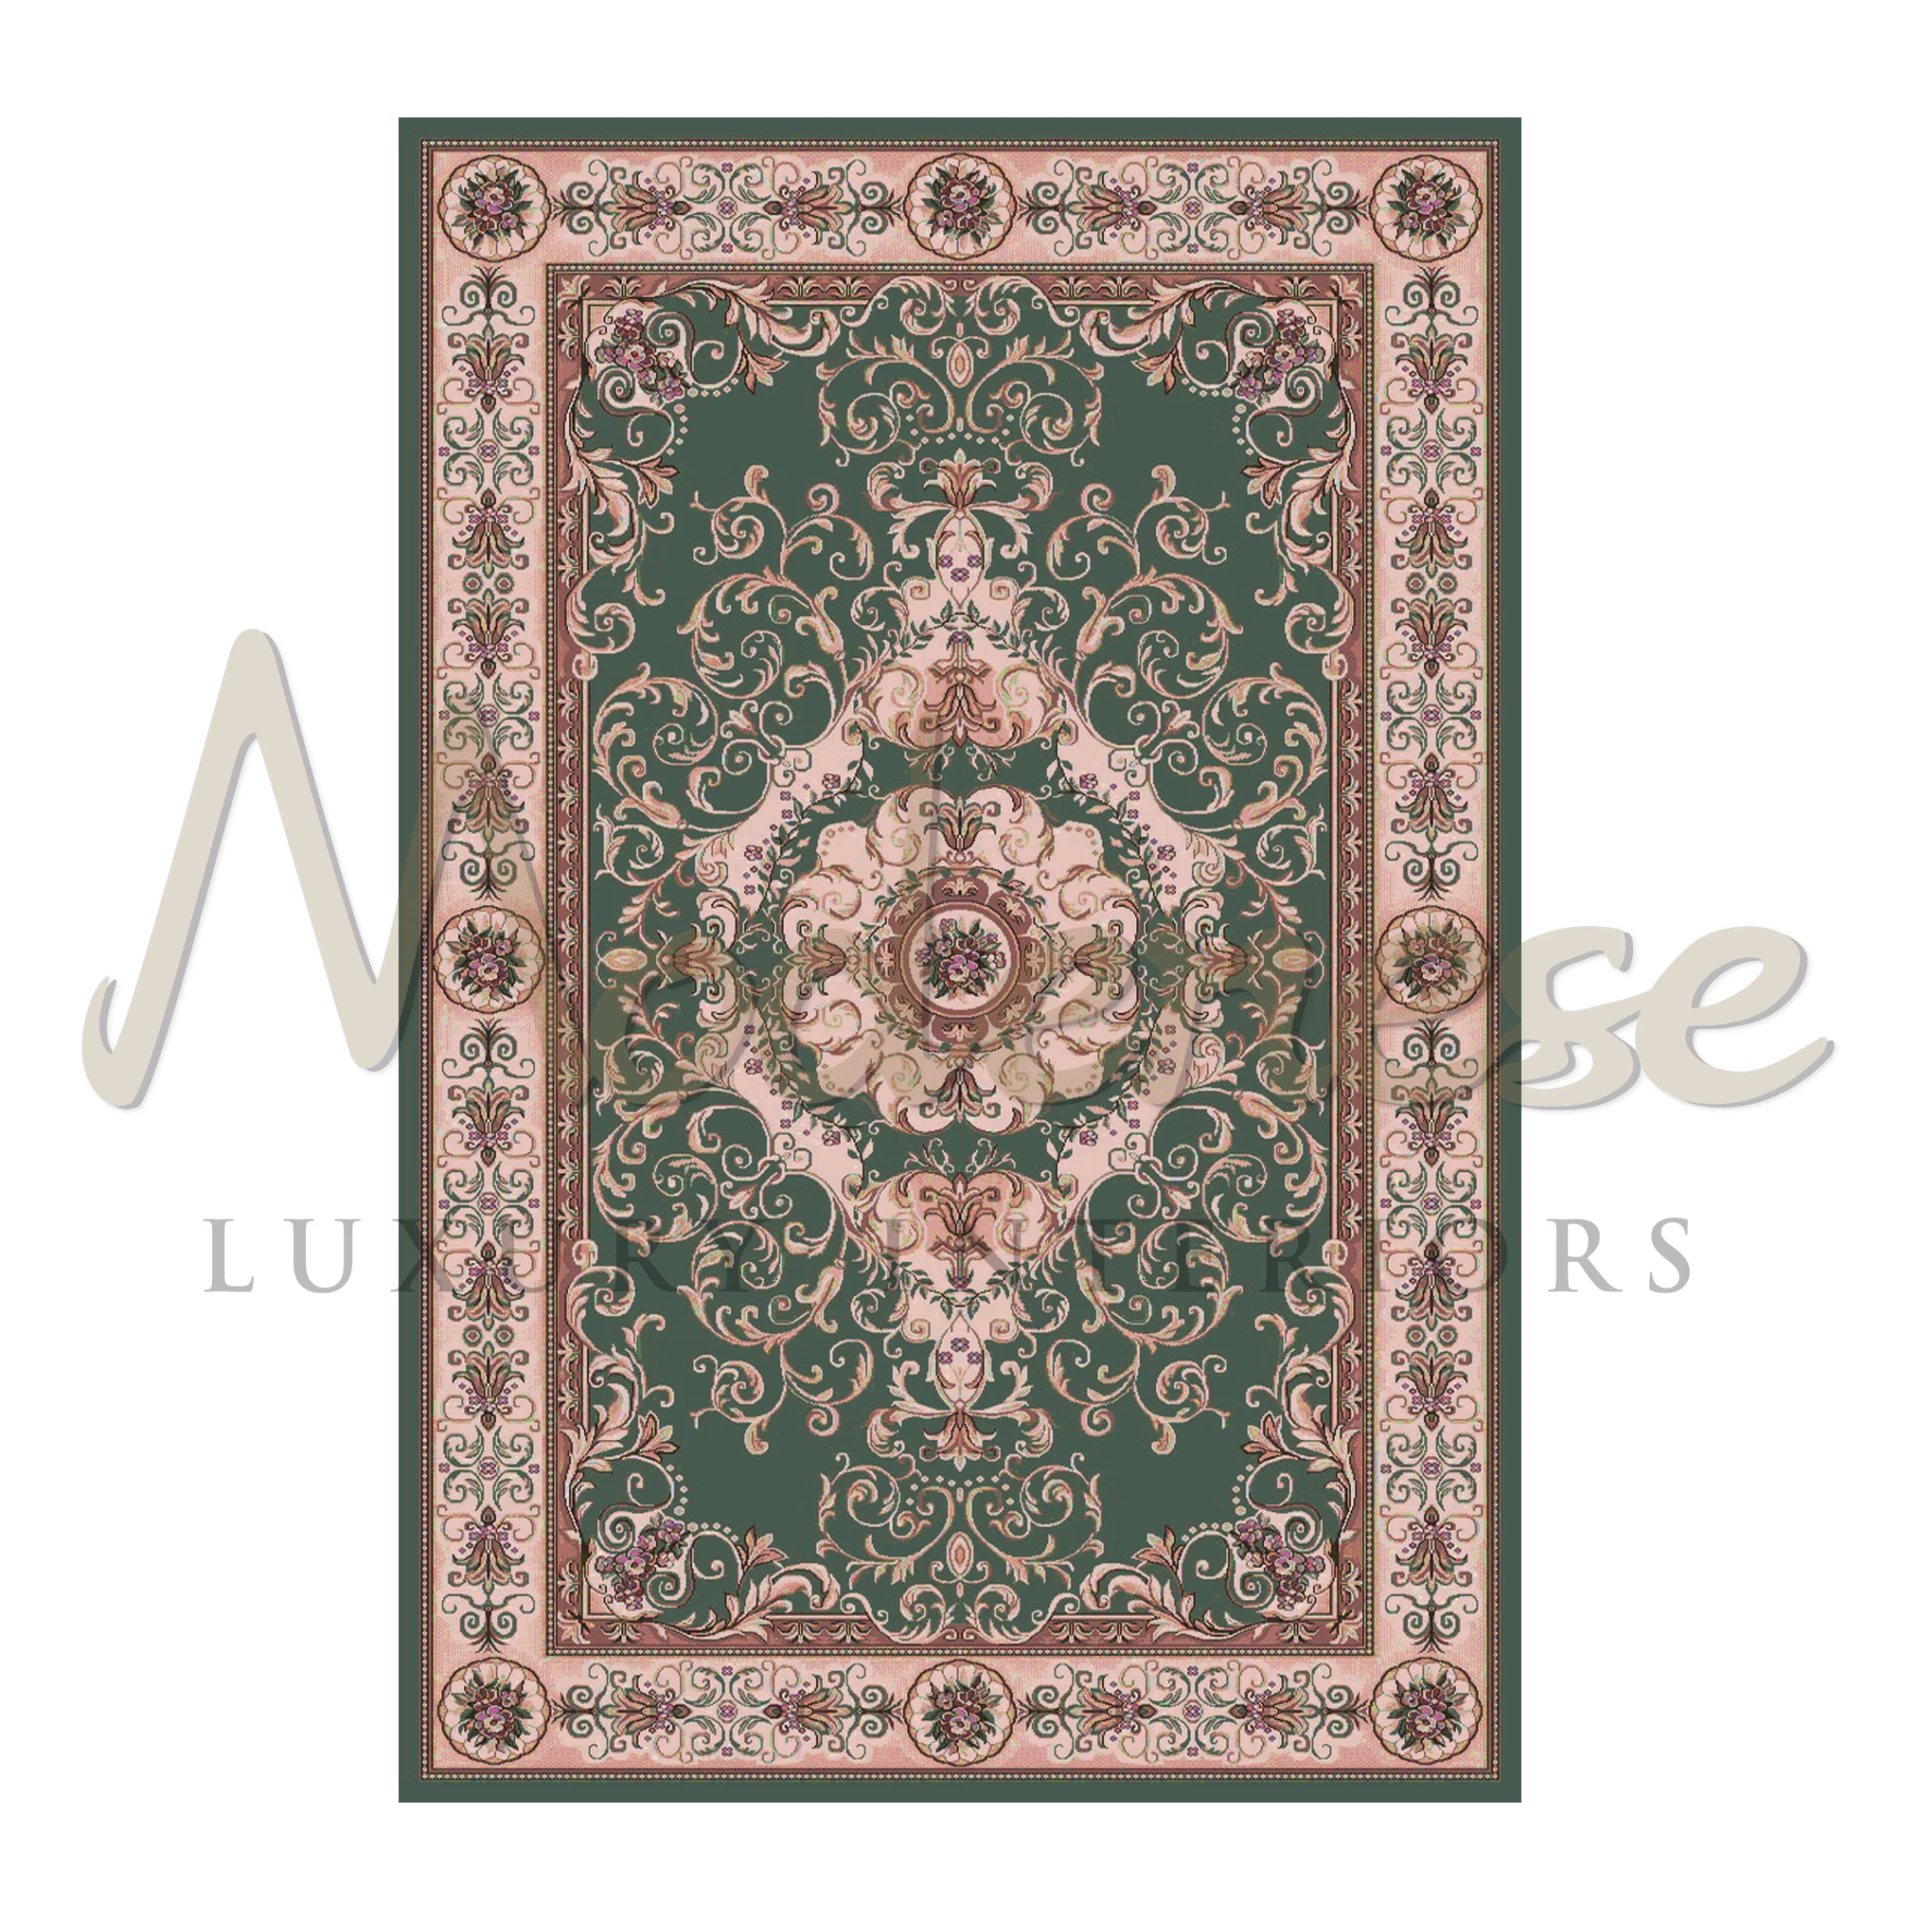 Emerald Pink Splendor Rug from the decor collection of Modenese Luxury Furniture